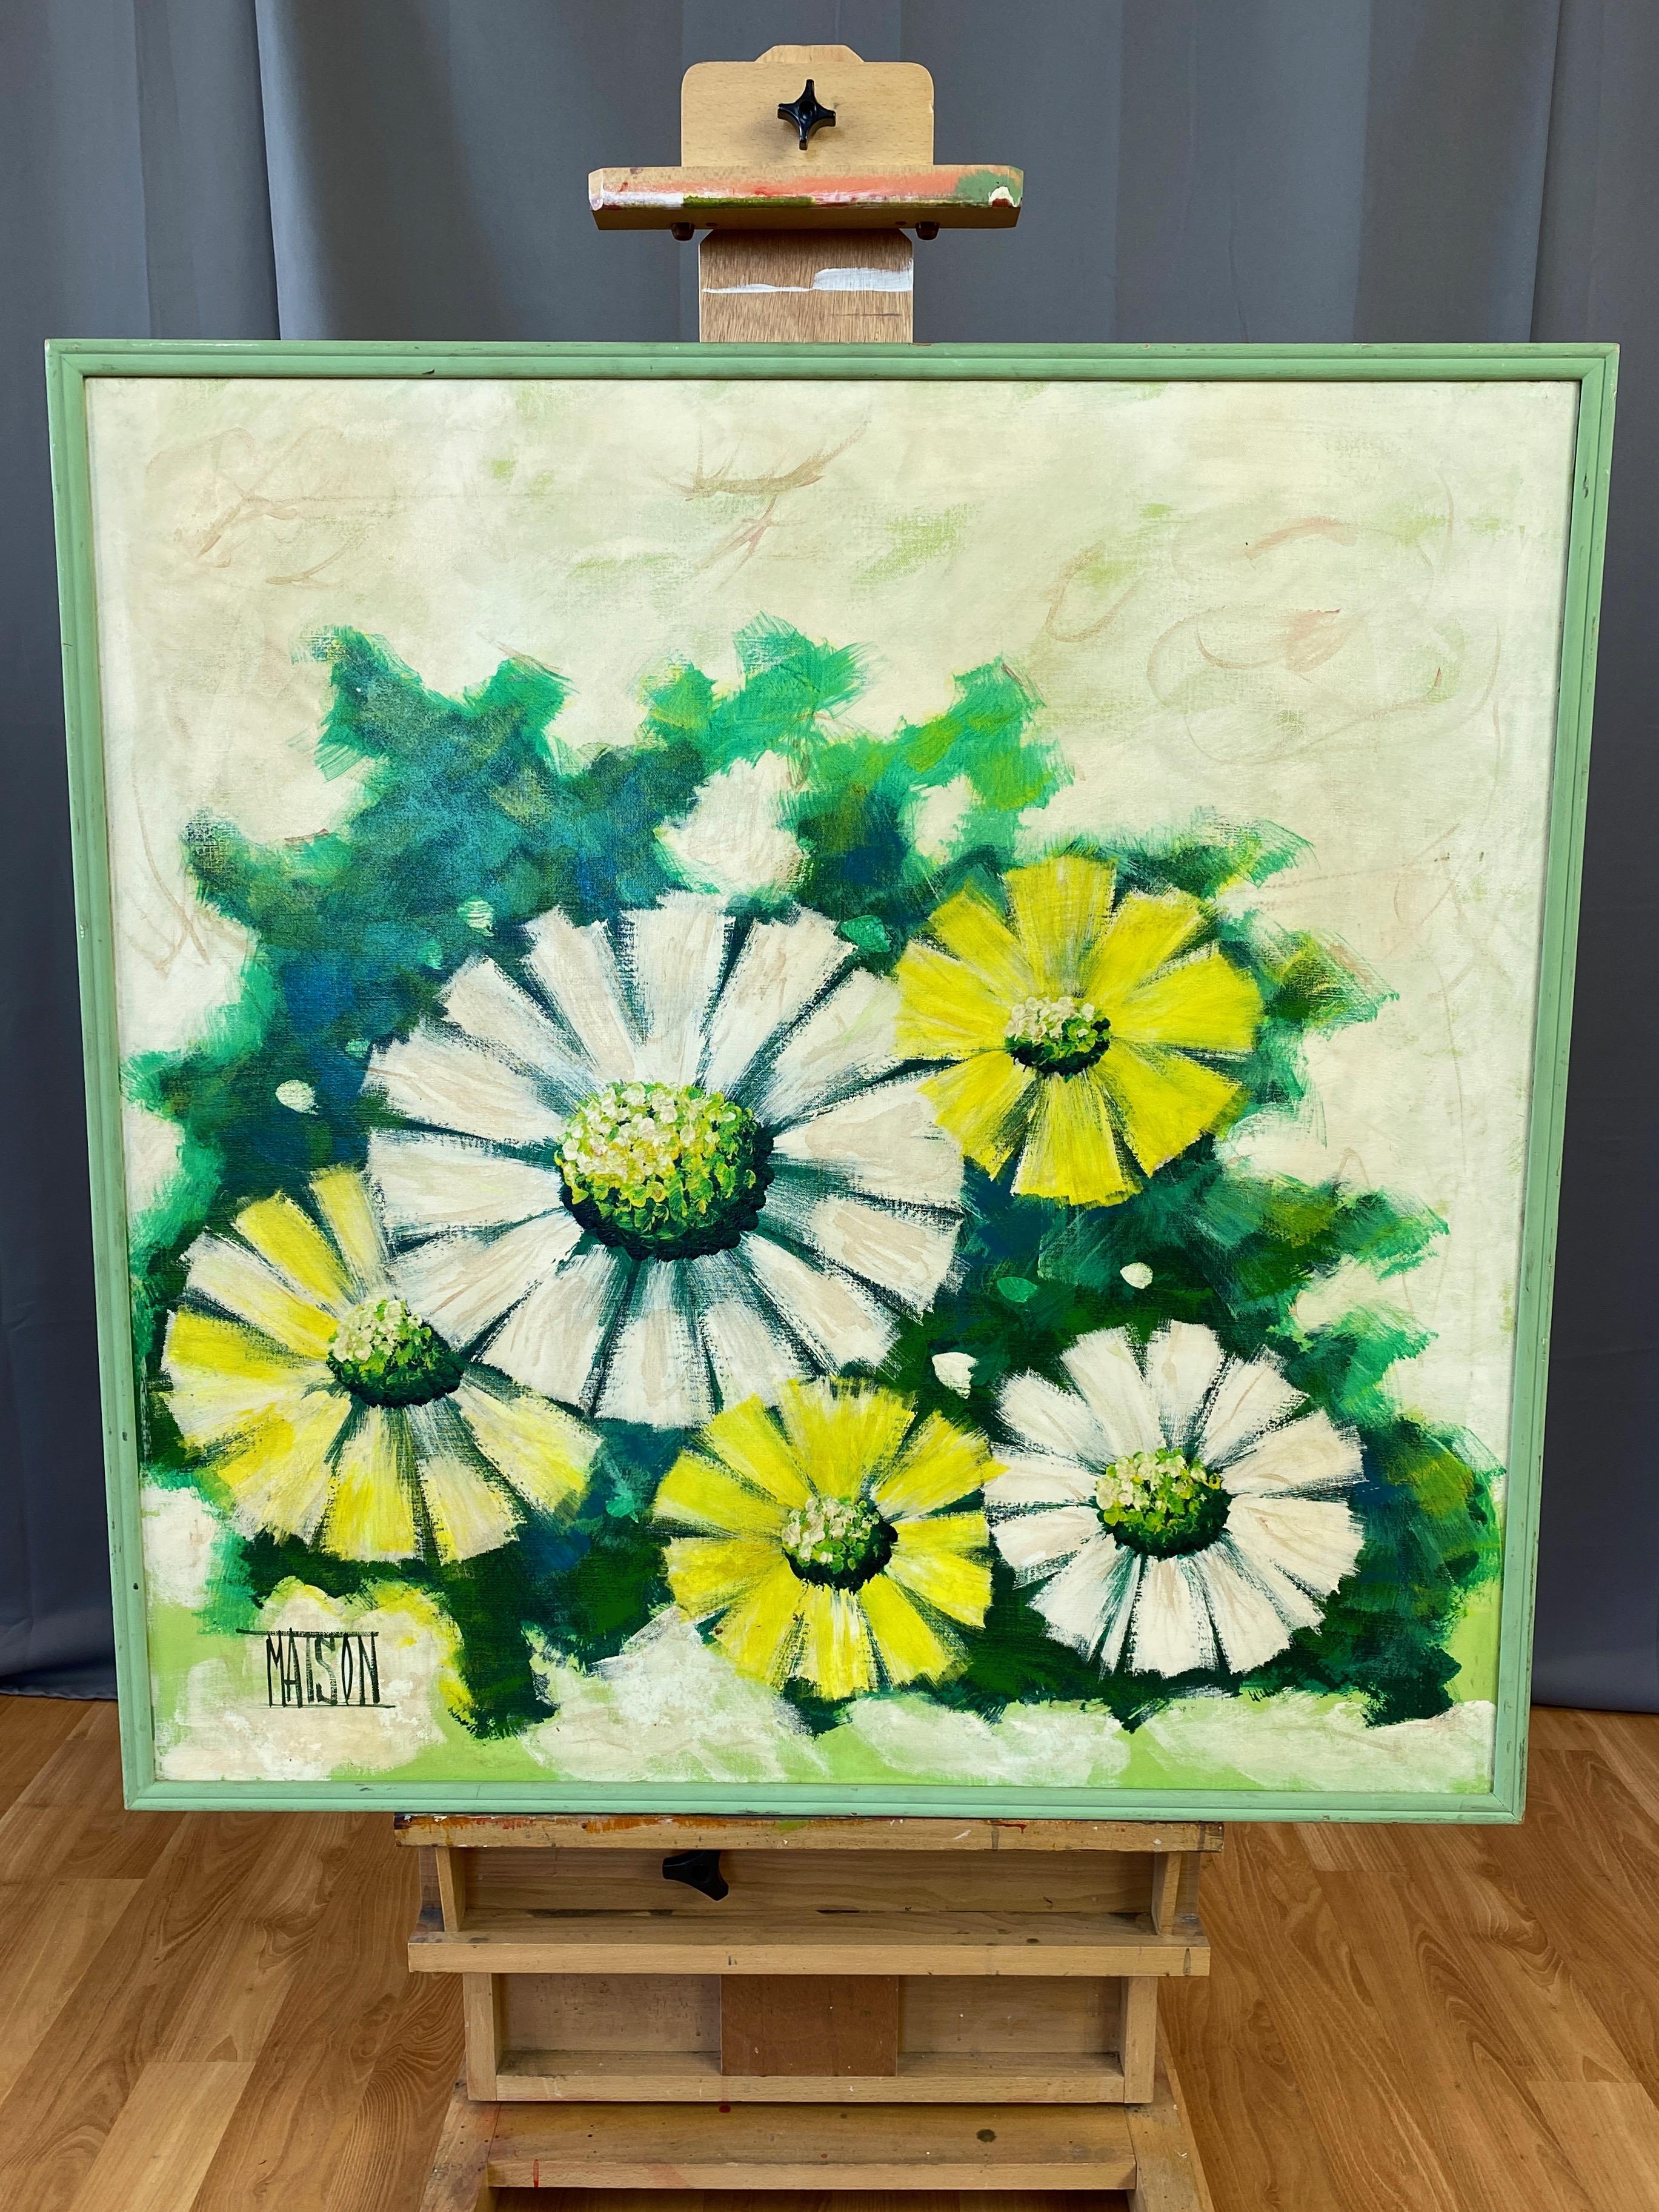 Painted Matson “Daisies”, Large Expressionist Acrylic Painting, 1960s